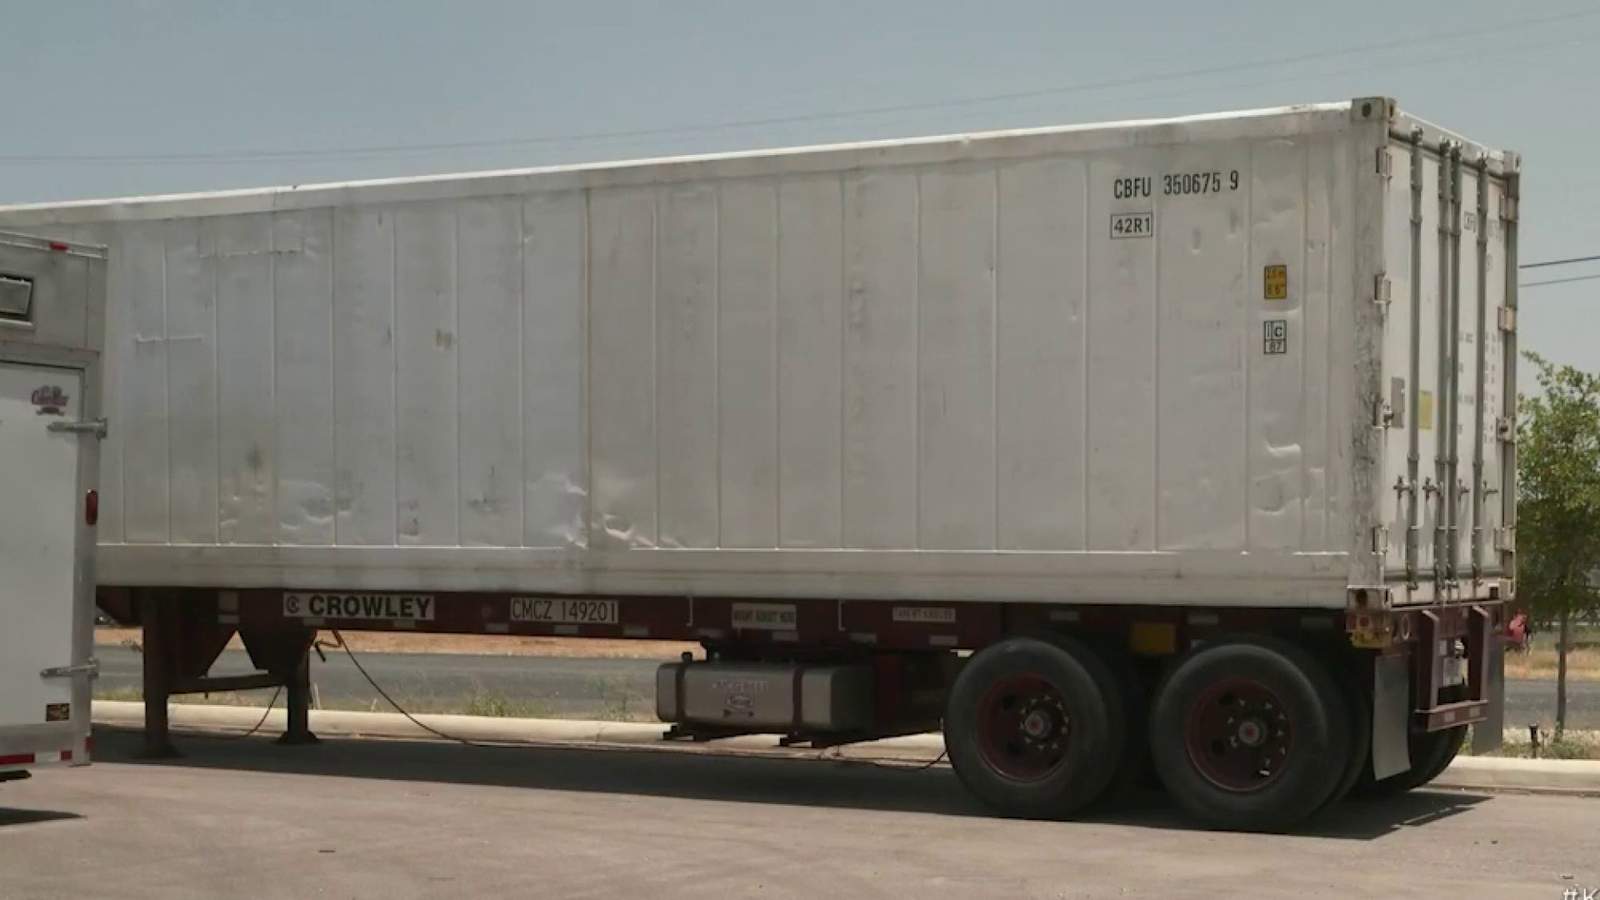 San Antonio will have 5 refrigerated trailers operational to store corpses amid COVID-19 surge